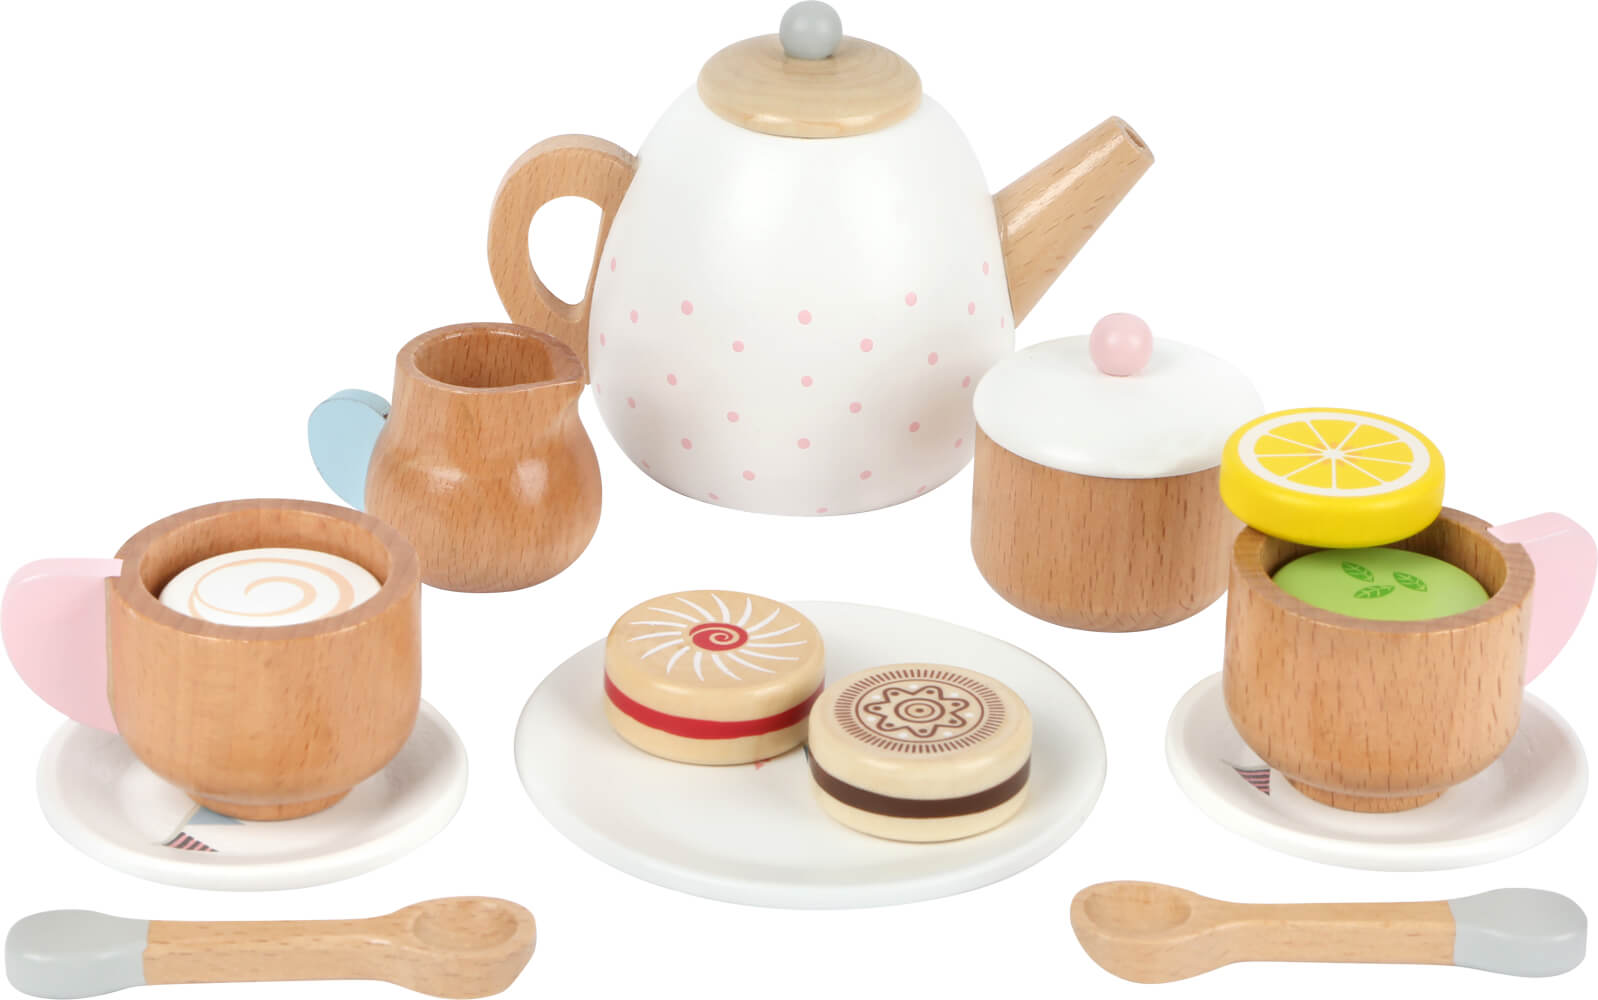 Various Wooden Tea Set Kitchen Accessories for Childrens Tea Party Pretend Play 